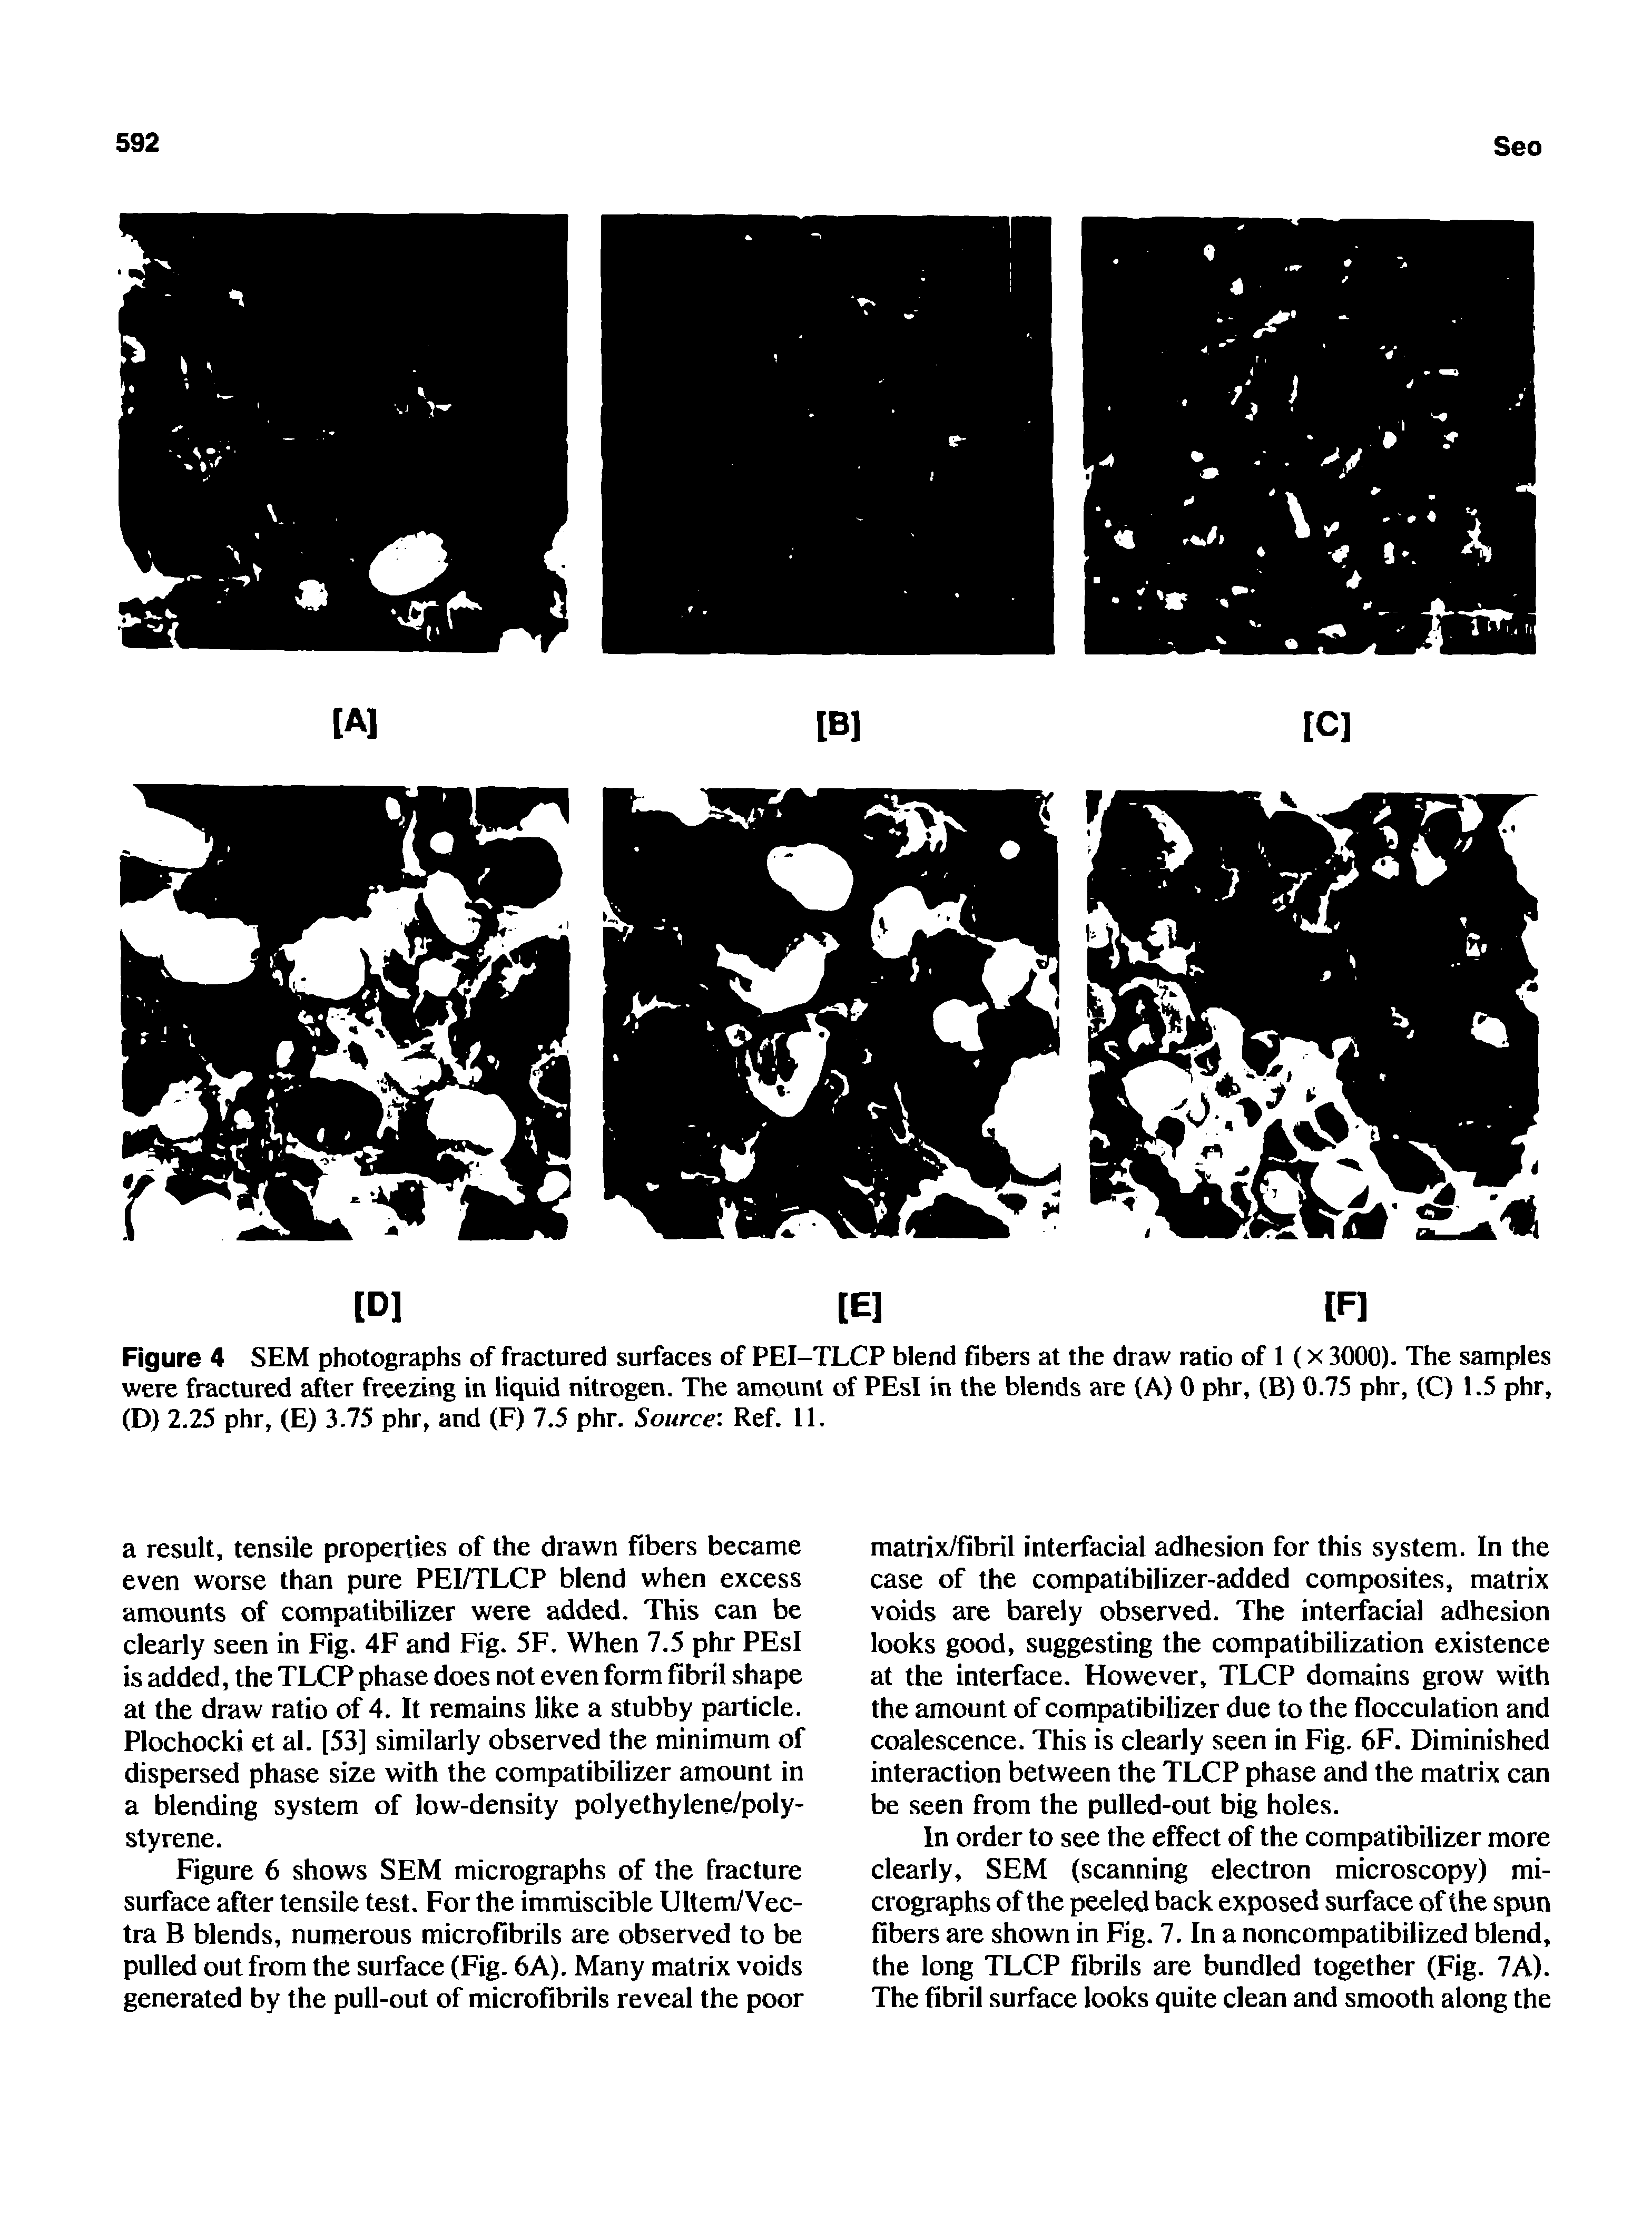 Figure 4 SEM photographs of fractured surfaces of PEI-TLCP blend fibers at the draw ratio of 1 (x 3000). The samples were fractured after freezing in liquid nitrogen. The amount of PEsl in the blends are (A) 0 phr, (B) 0.75 phr, (C) 1.5 phr, (D) 2.25 phr, (E) 3.75 phr, and (F) 7.5 phr. Source Ref. 11.